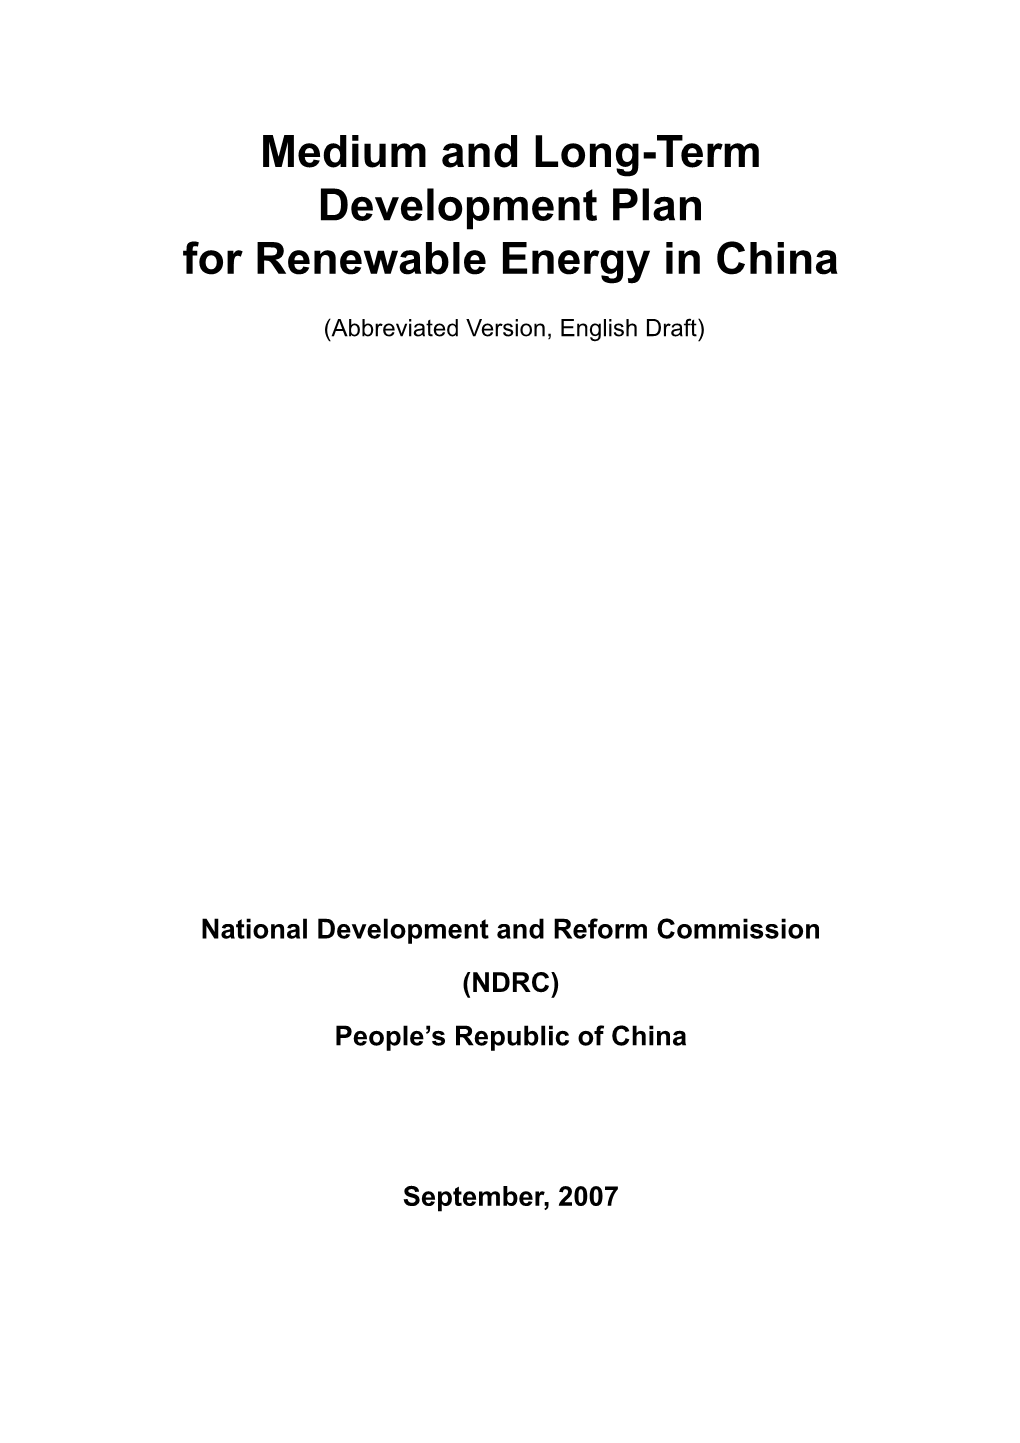 Medium and Long-Term Development Plan for Renewable Energy in China